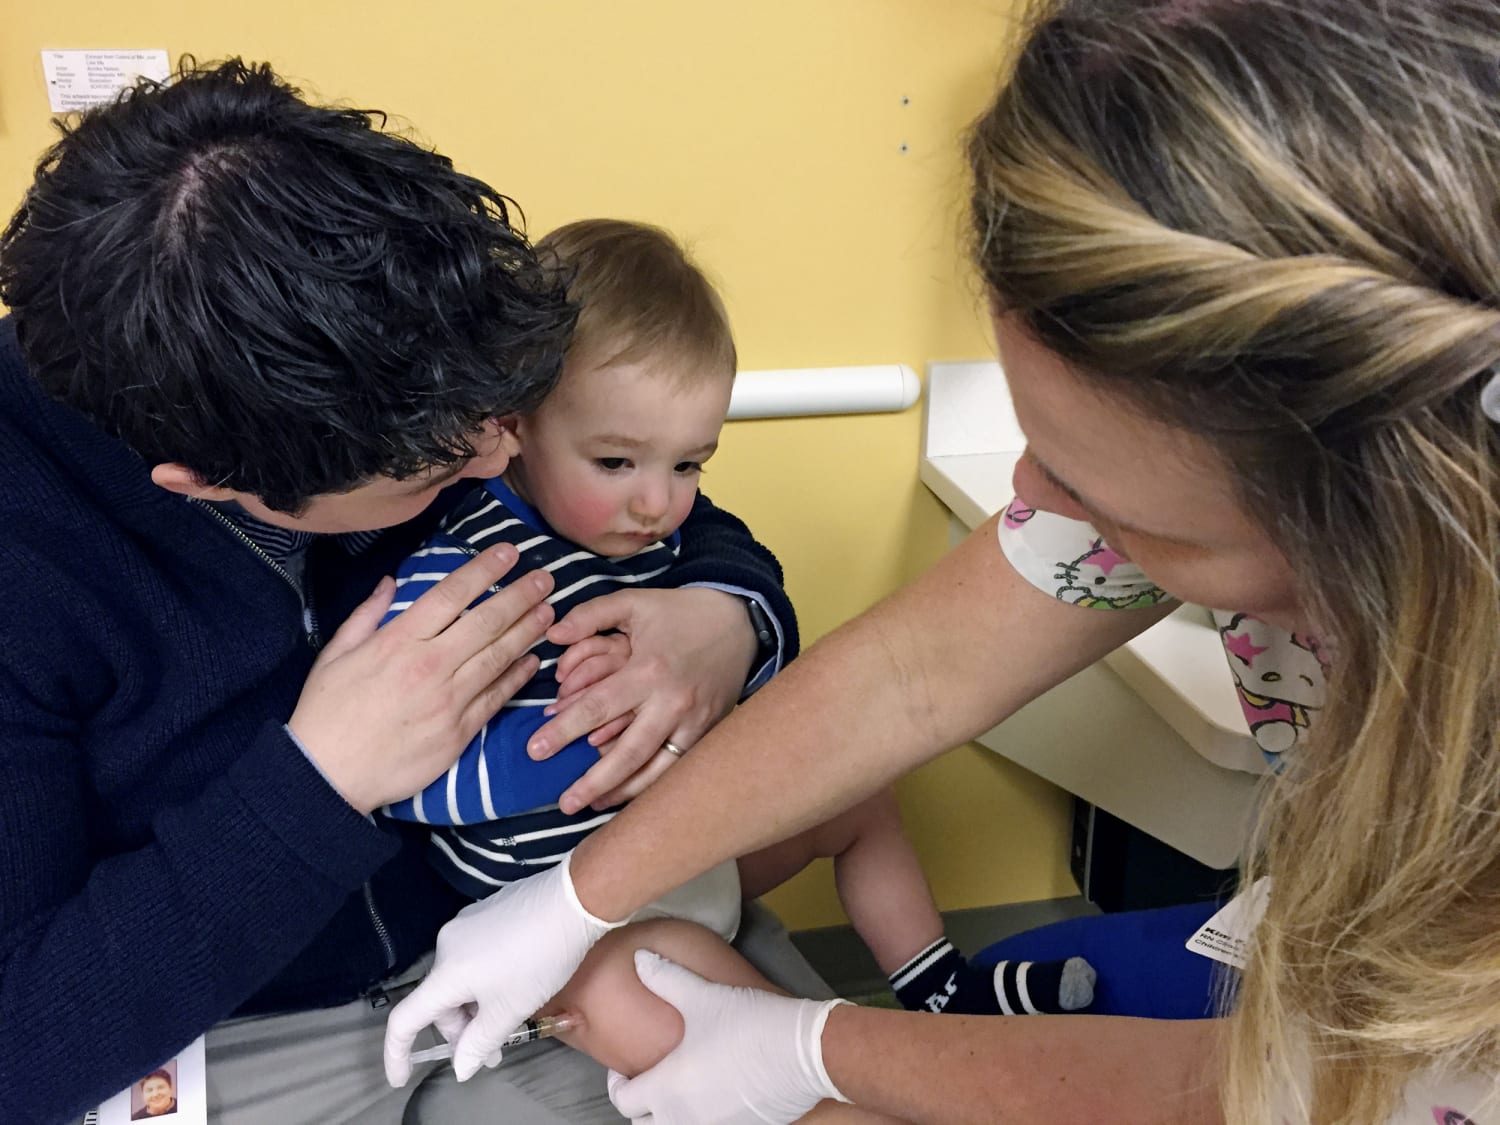 Majority of mumps cases are among the vaccinated, CDC finds